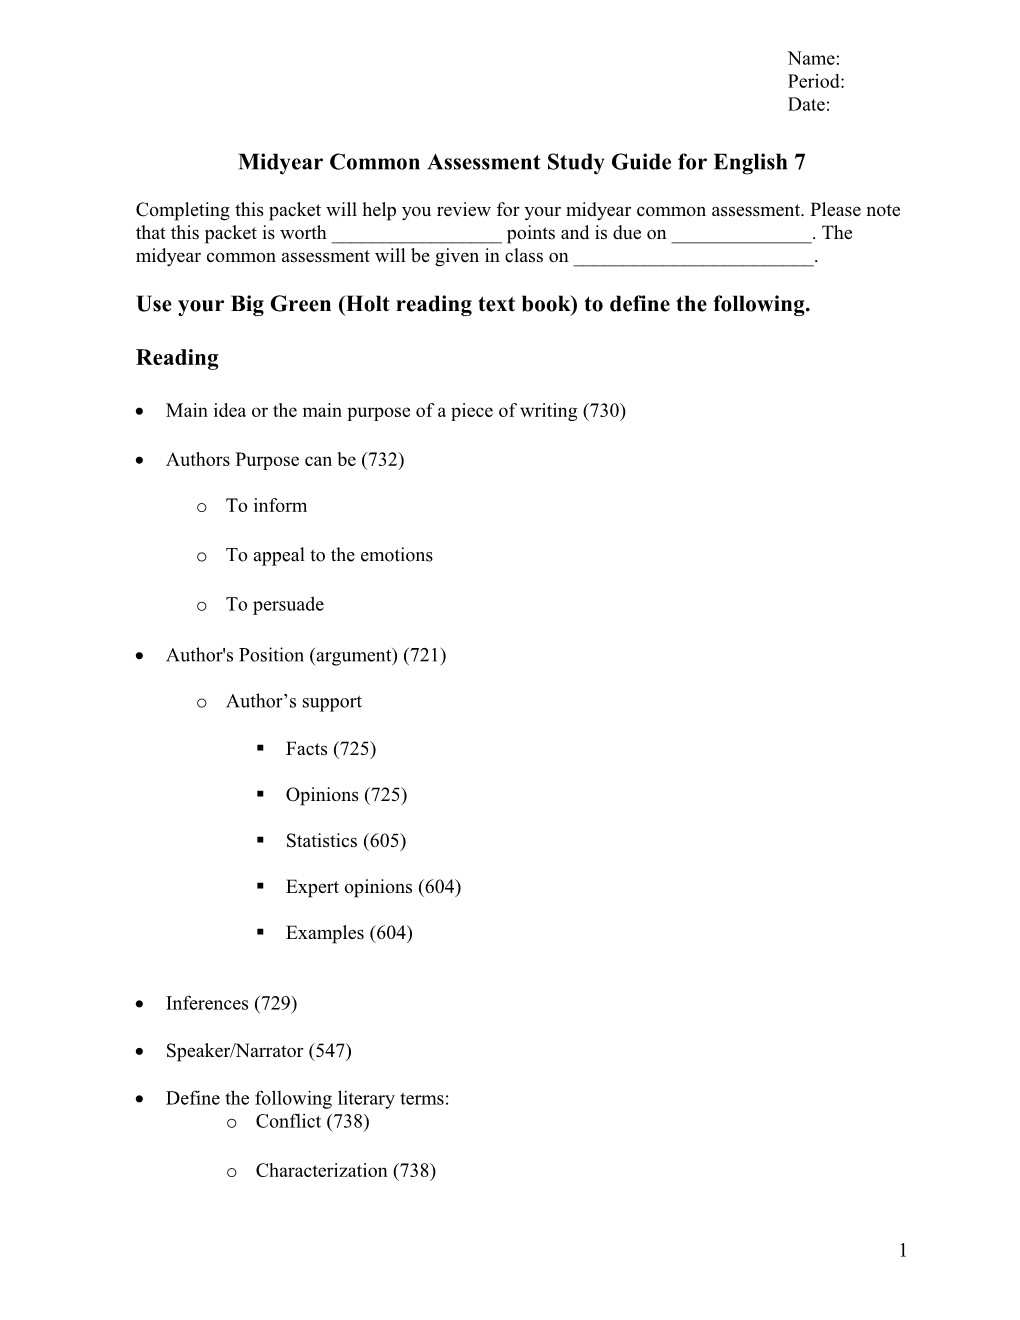 Midyear Common Assessment Study Guide for English 7